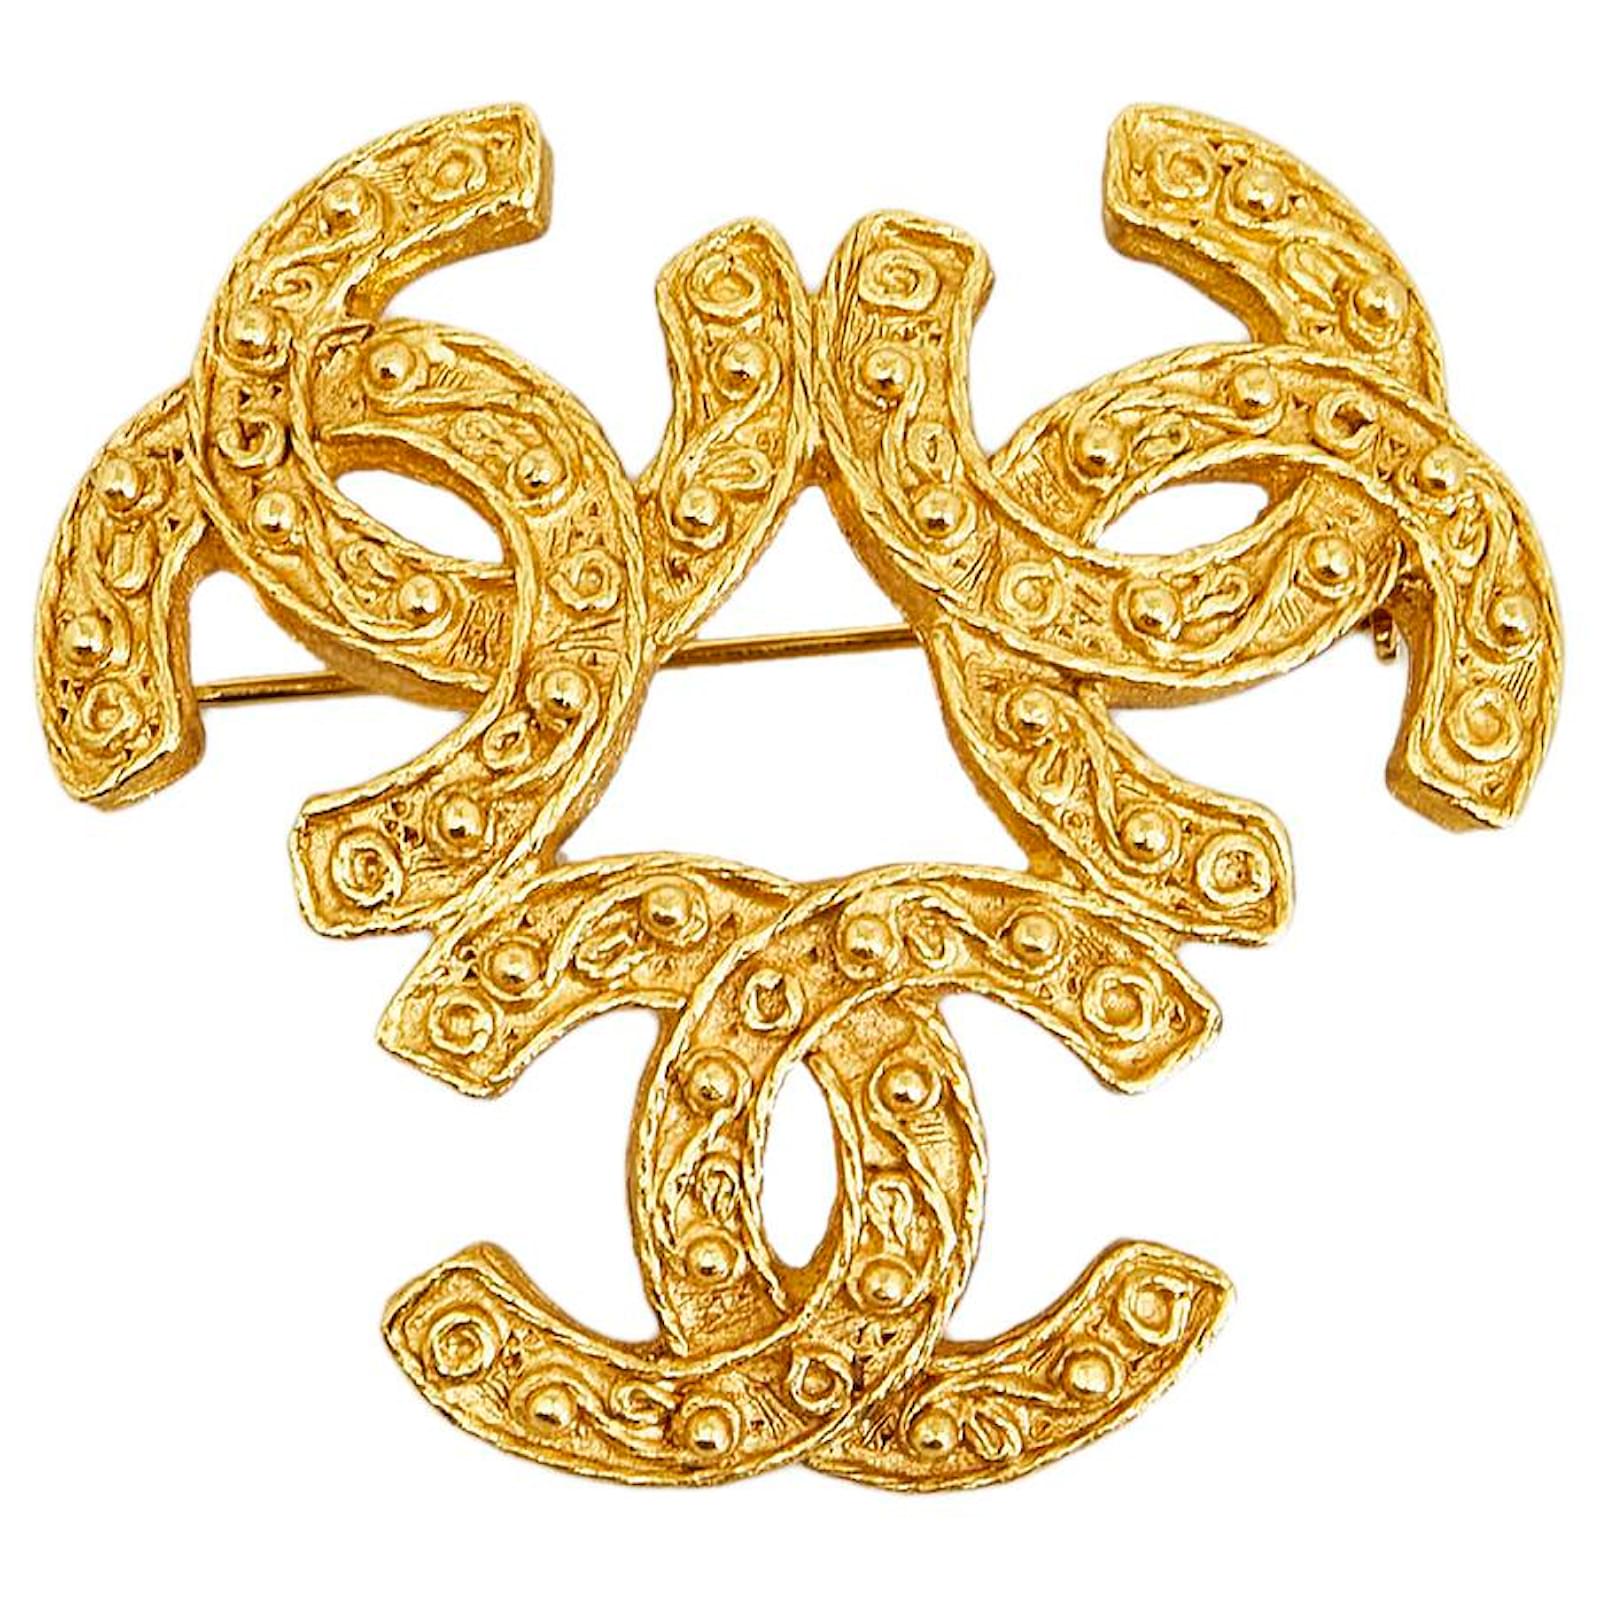 Chanel Vintage Golden Turn Lock CC Pin Brooch with Crystals